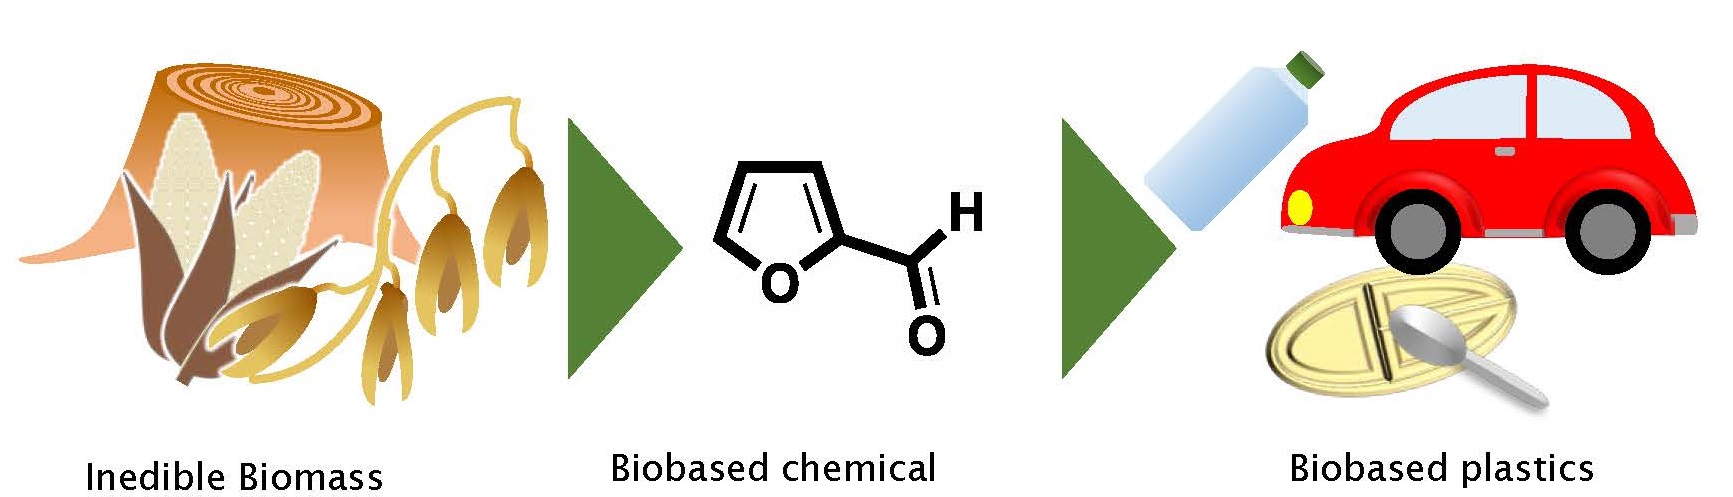 Climate Control by biobased plastics derived from inedible biomass resources